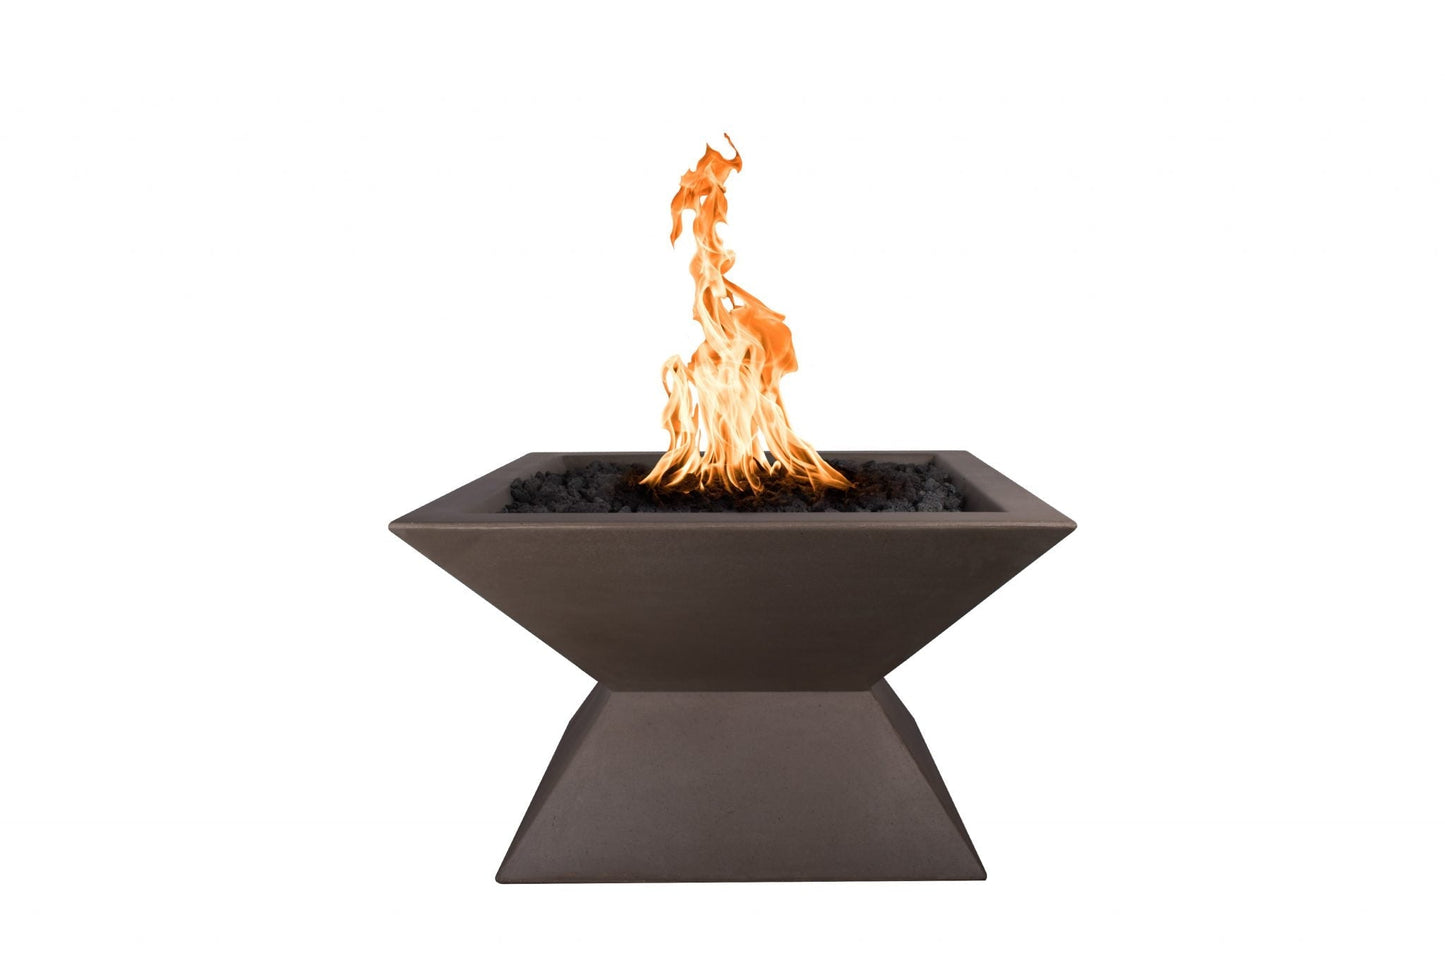 The Outdoor Plus Square Uxmal 30" Rustic White GFRC Concrete Liquid Propane Fire Pit with 12V Electronic Ignition